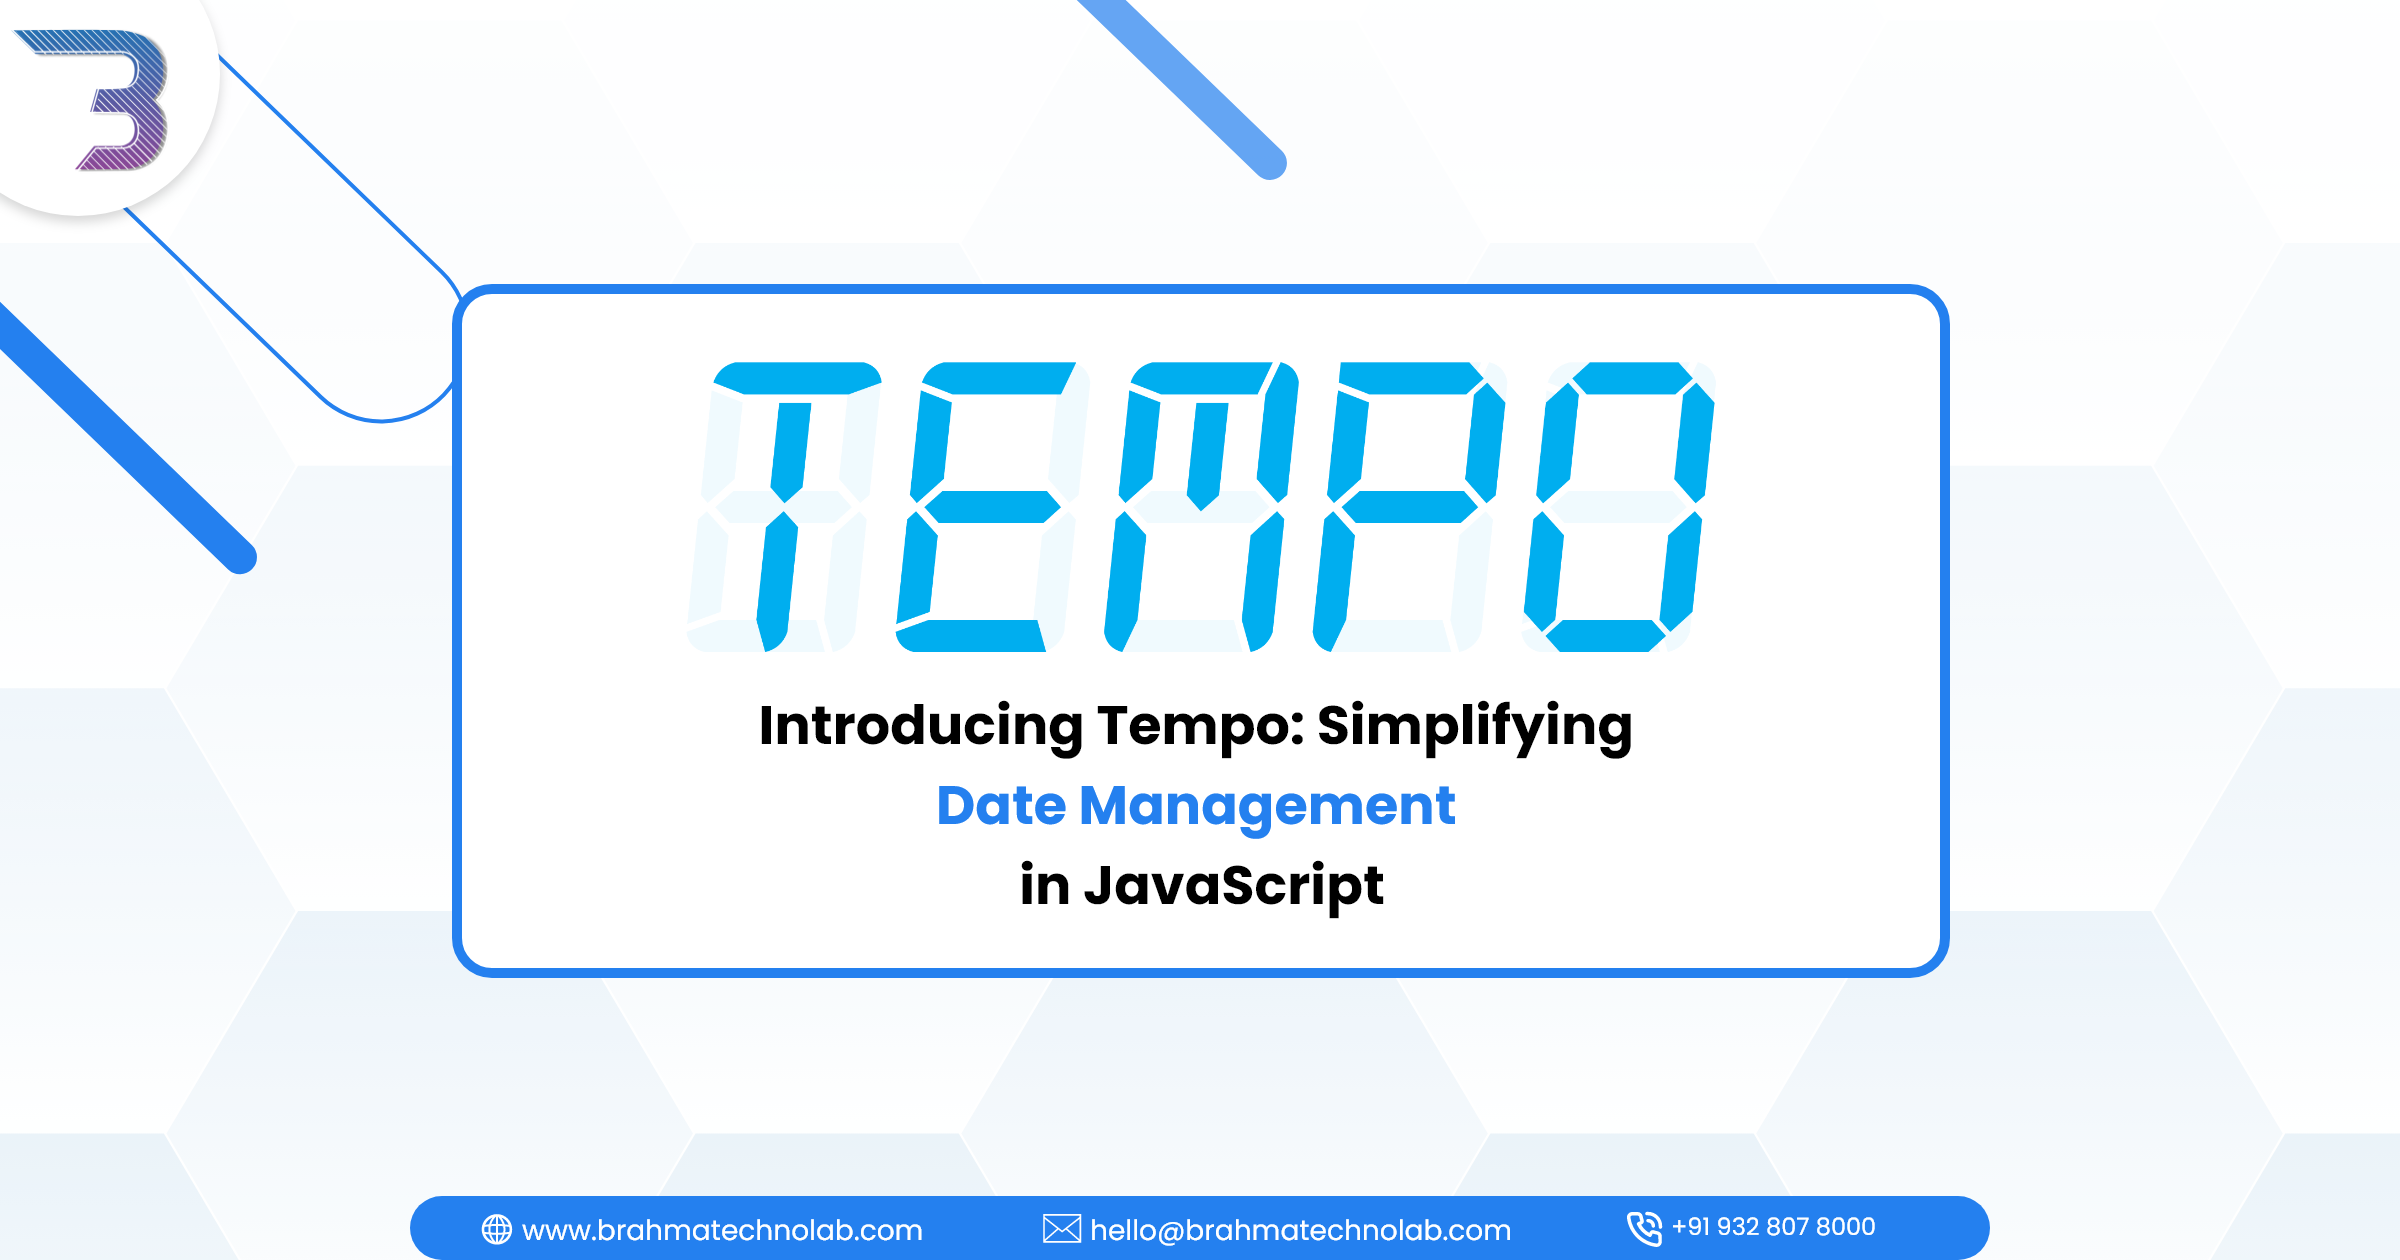 Introducing Tempo: Simplifying Date Management in JavaScript